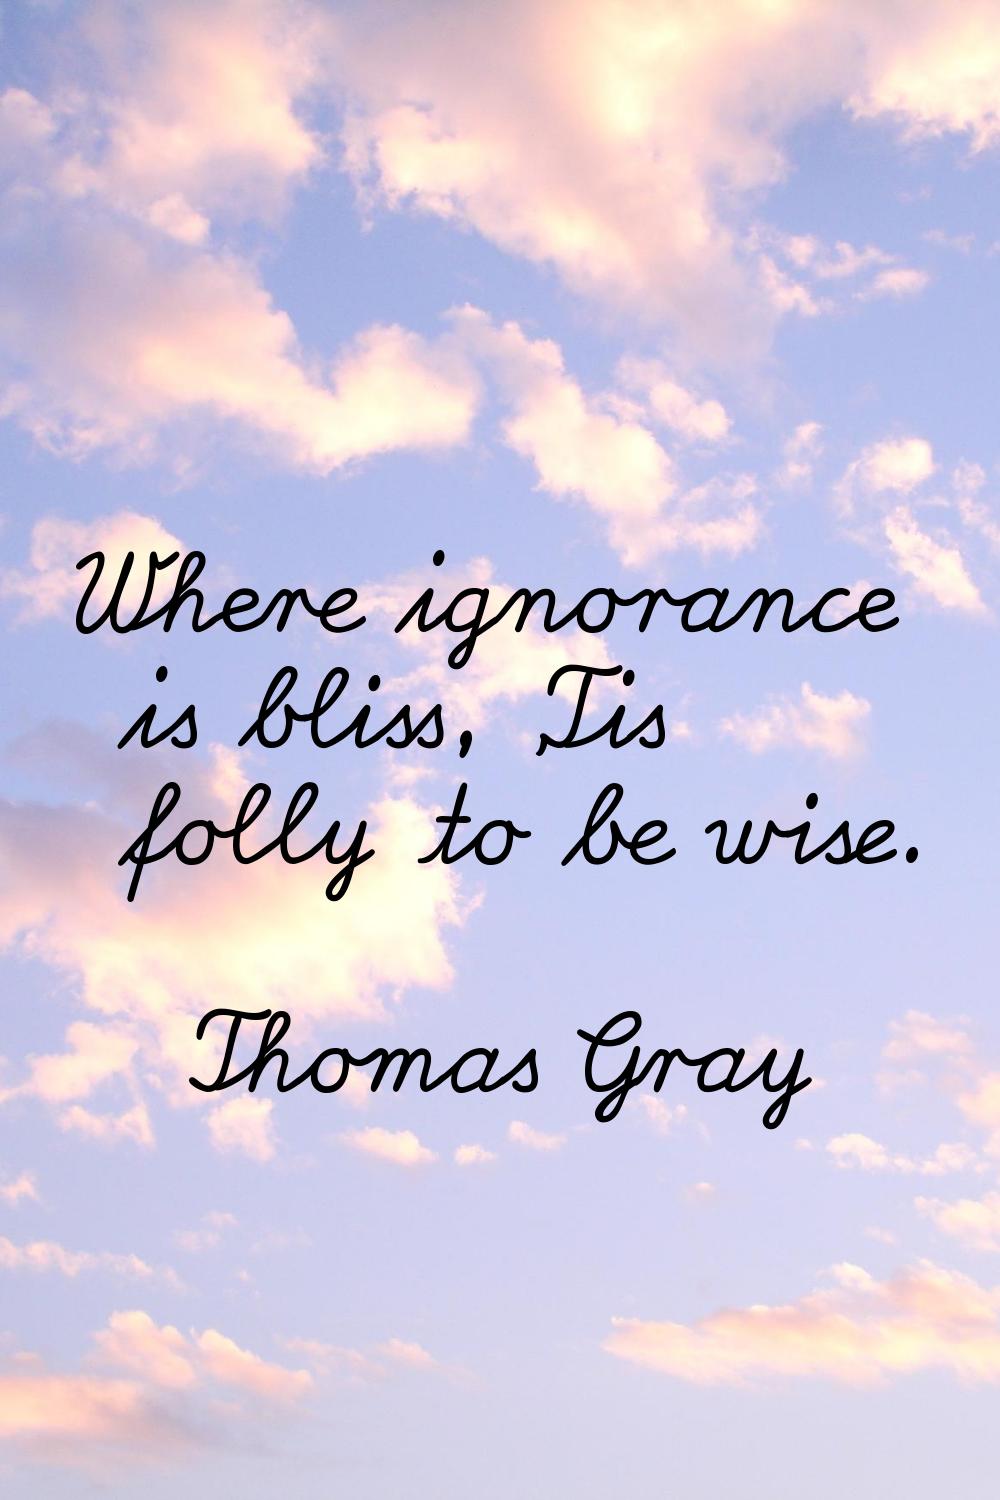 Where ignorance is bliss, 'Tis folly to be wise.